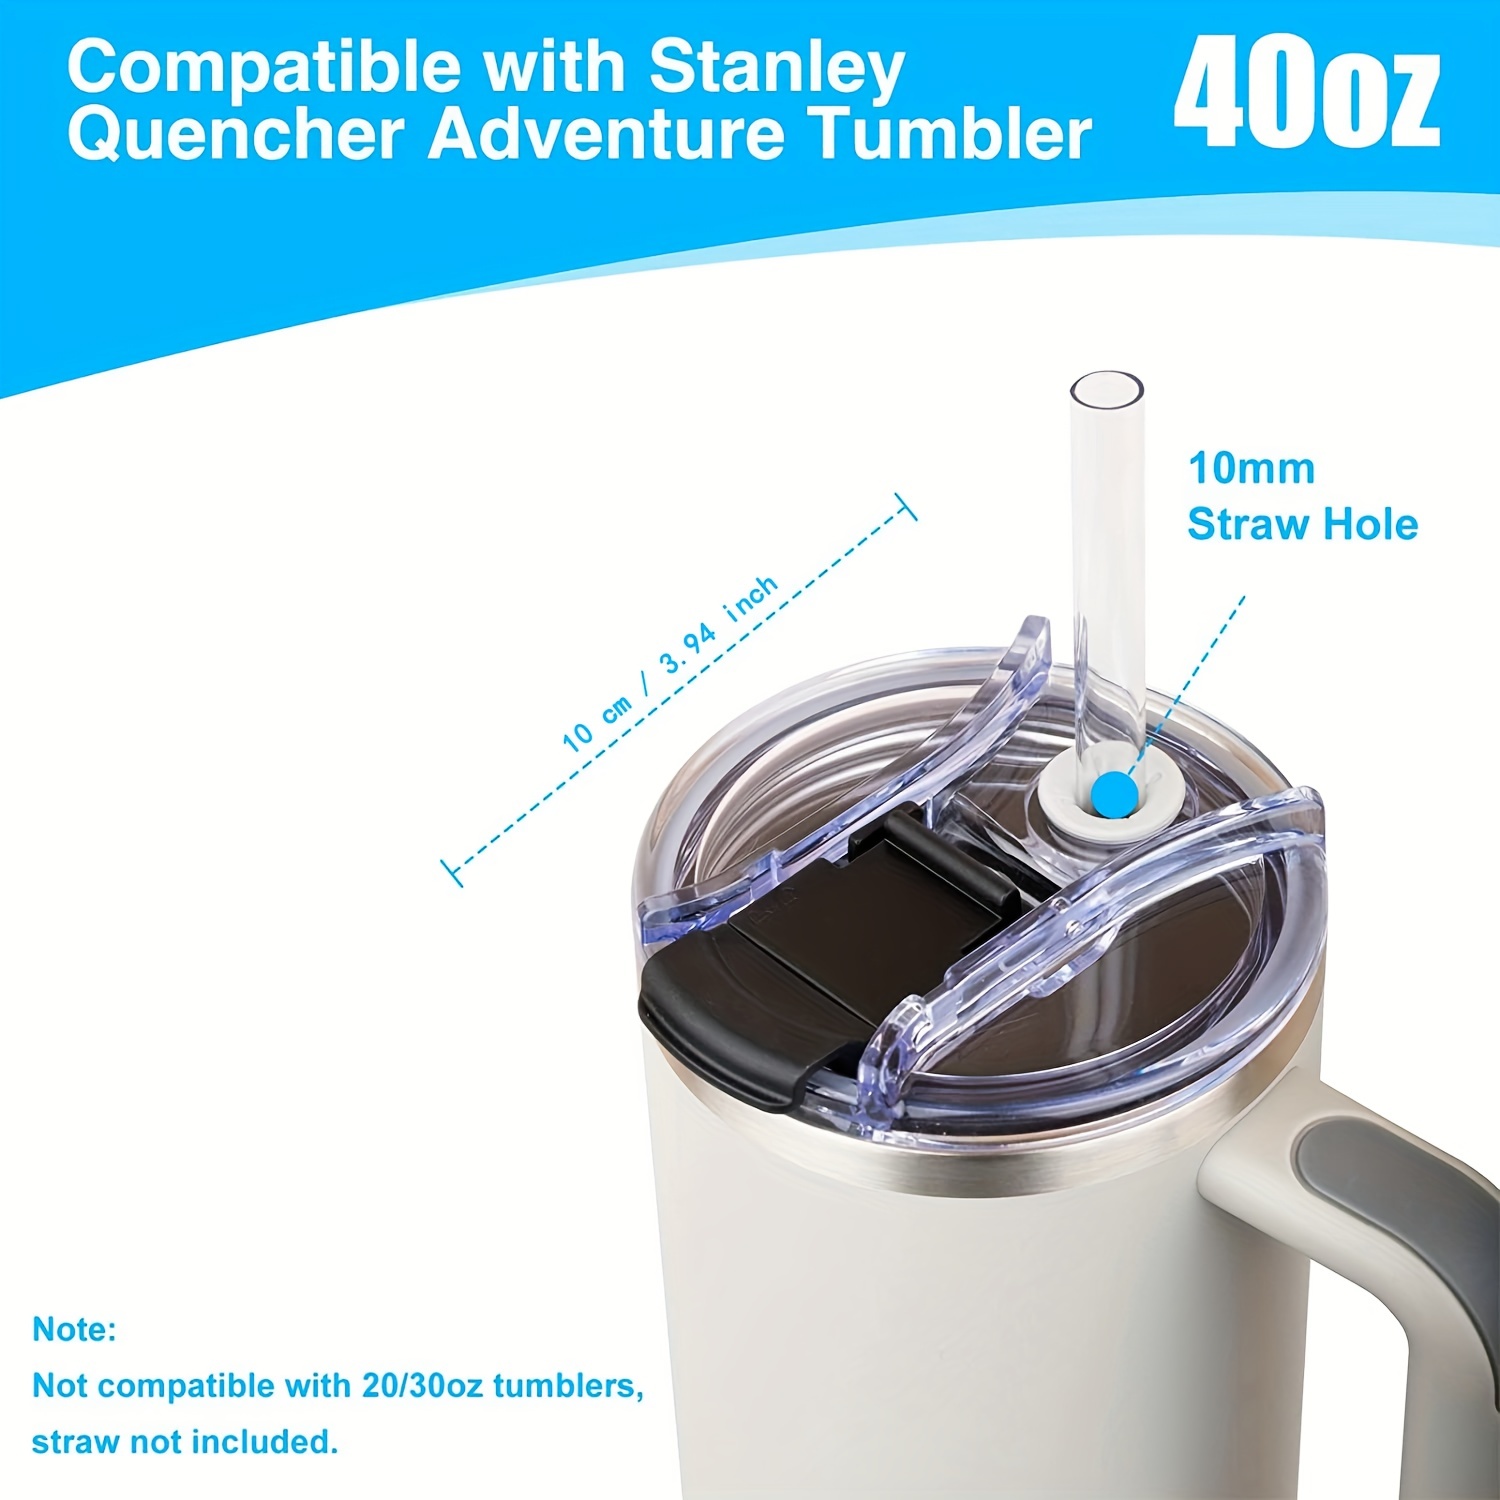 Replacement Lids for Stanley 40oz Tumbler Cups Quencher H2.0